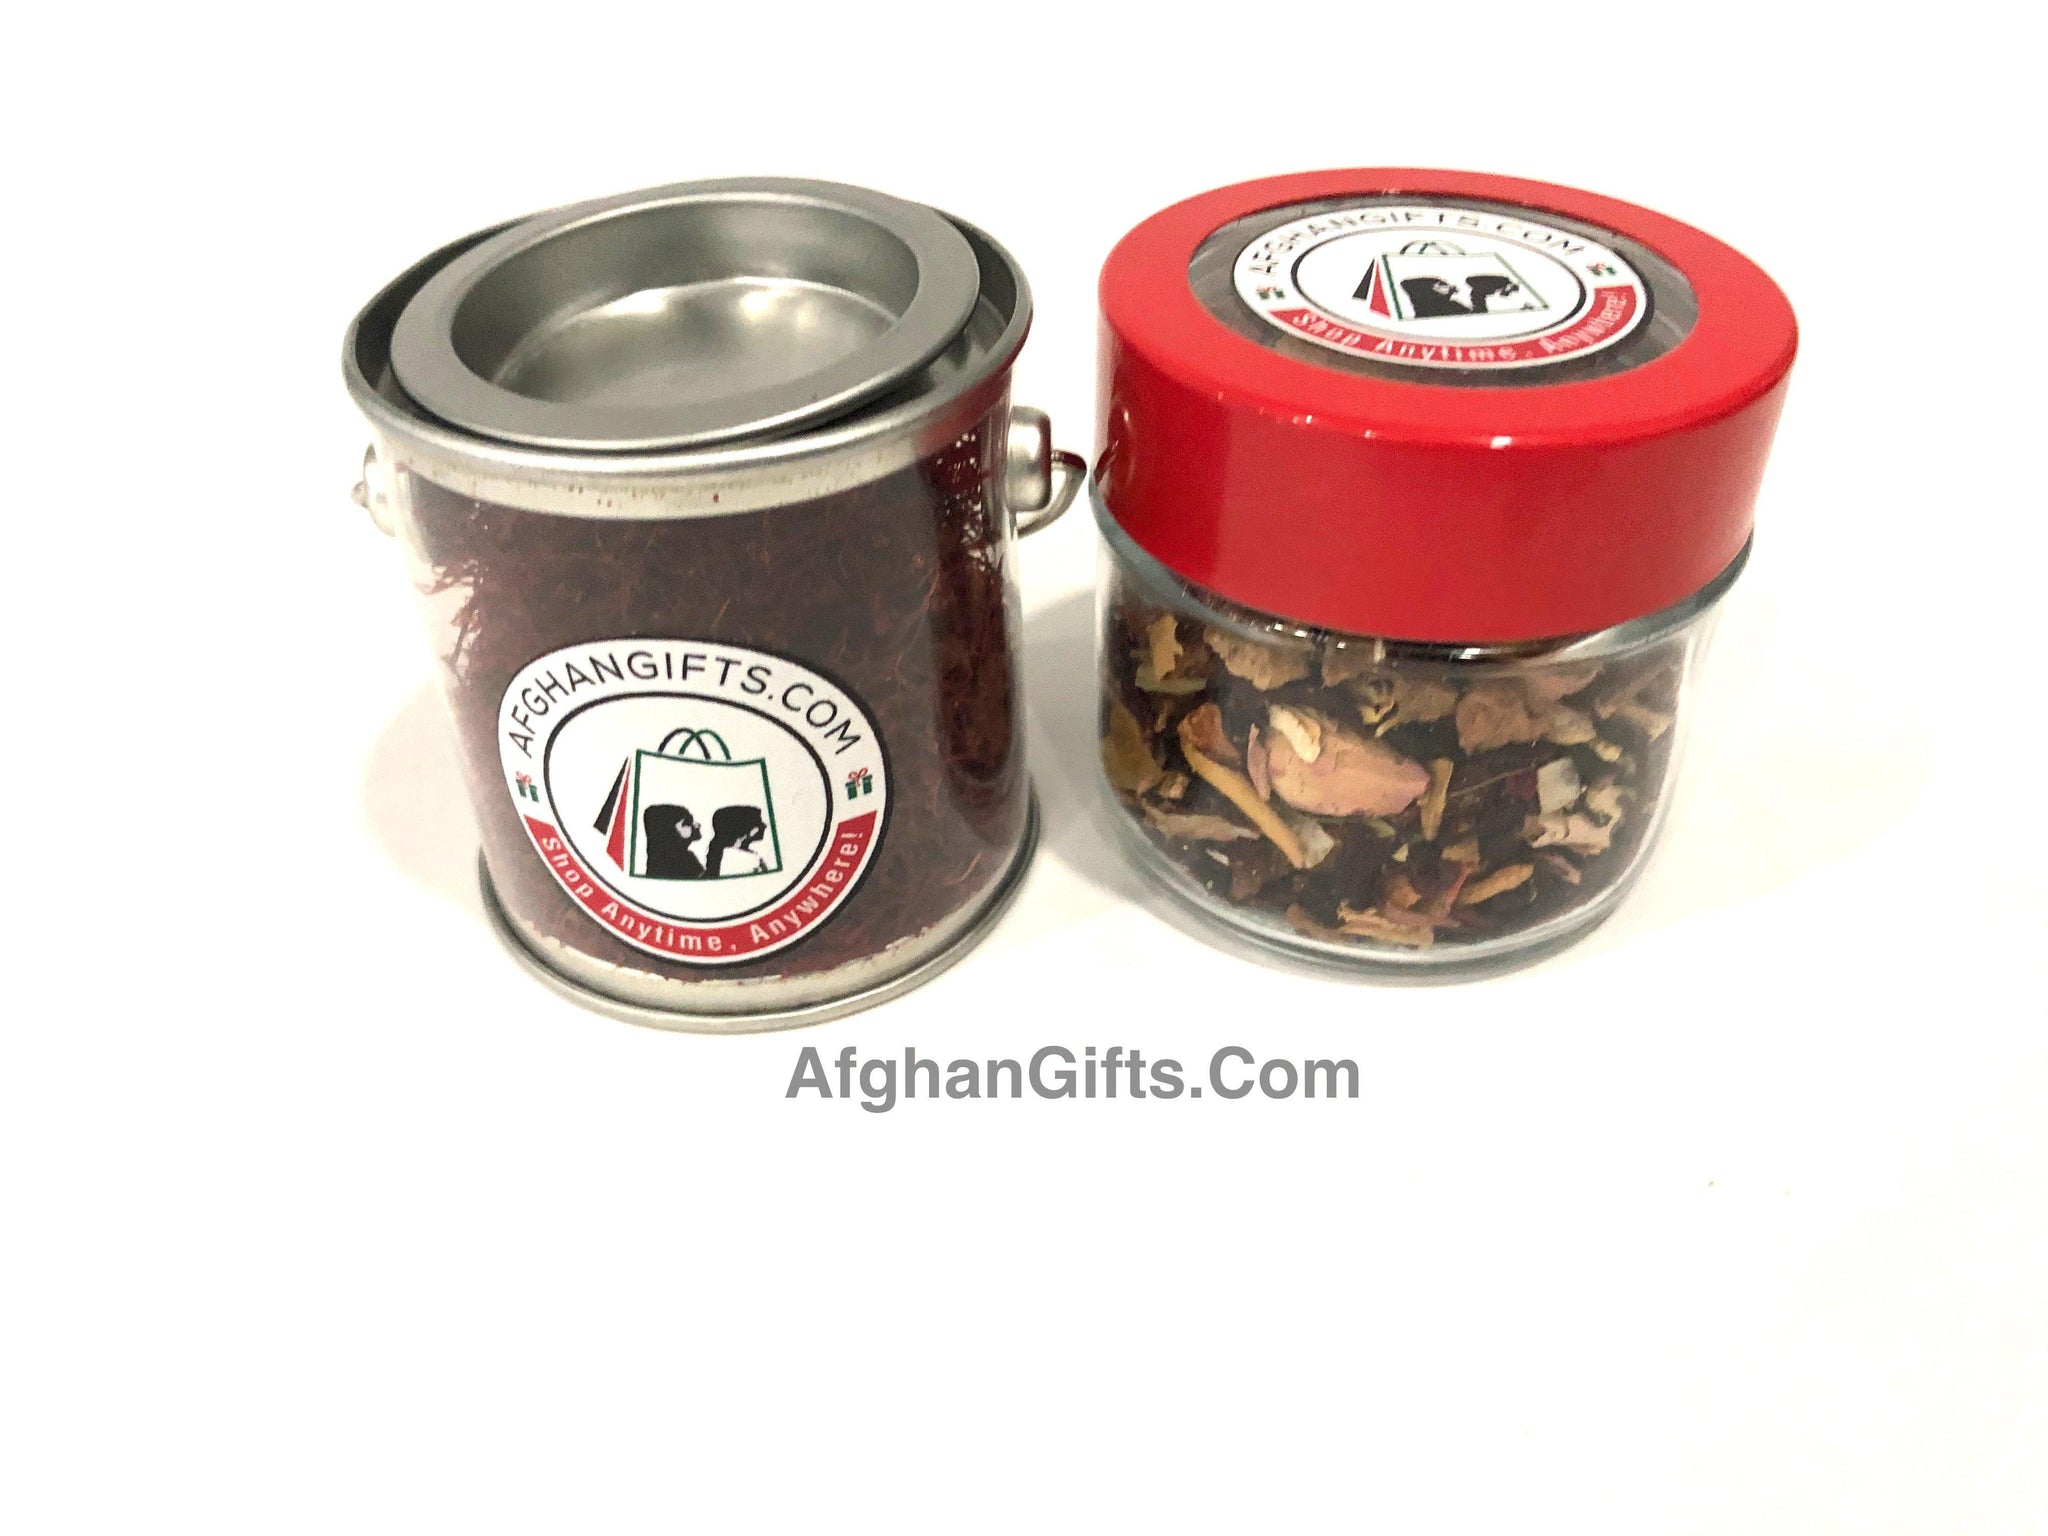 Turkish Love Tea infused with Saffron- 29 g - Afghan Gifts Shop